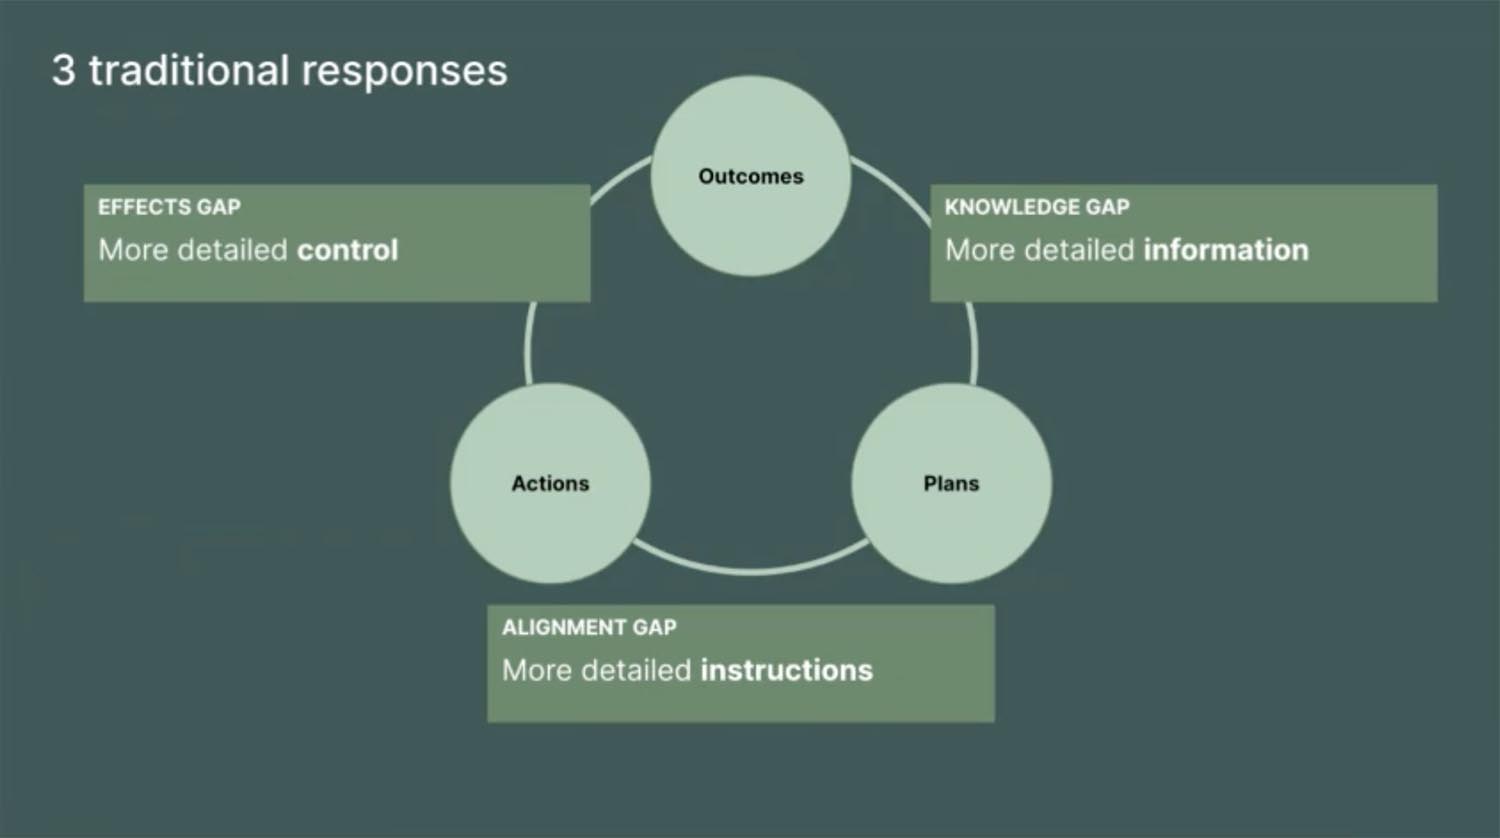 Between each of those three parts, there is the potential of three gaps in alignment and understanding: the knowledge gap, the alignment gap, and the effects gap.